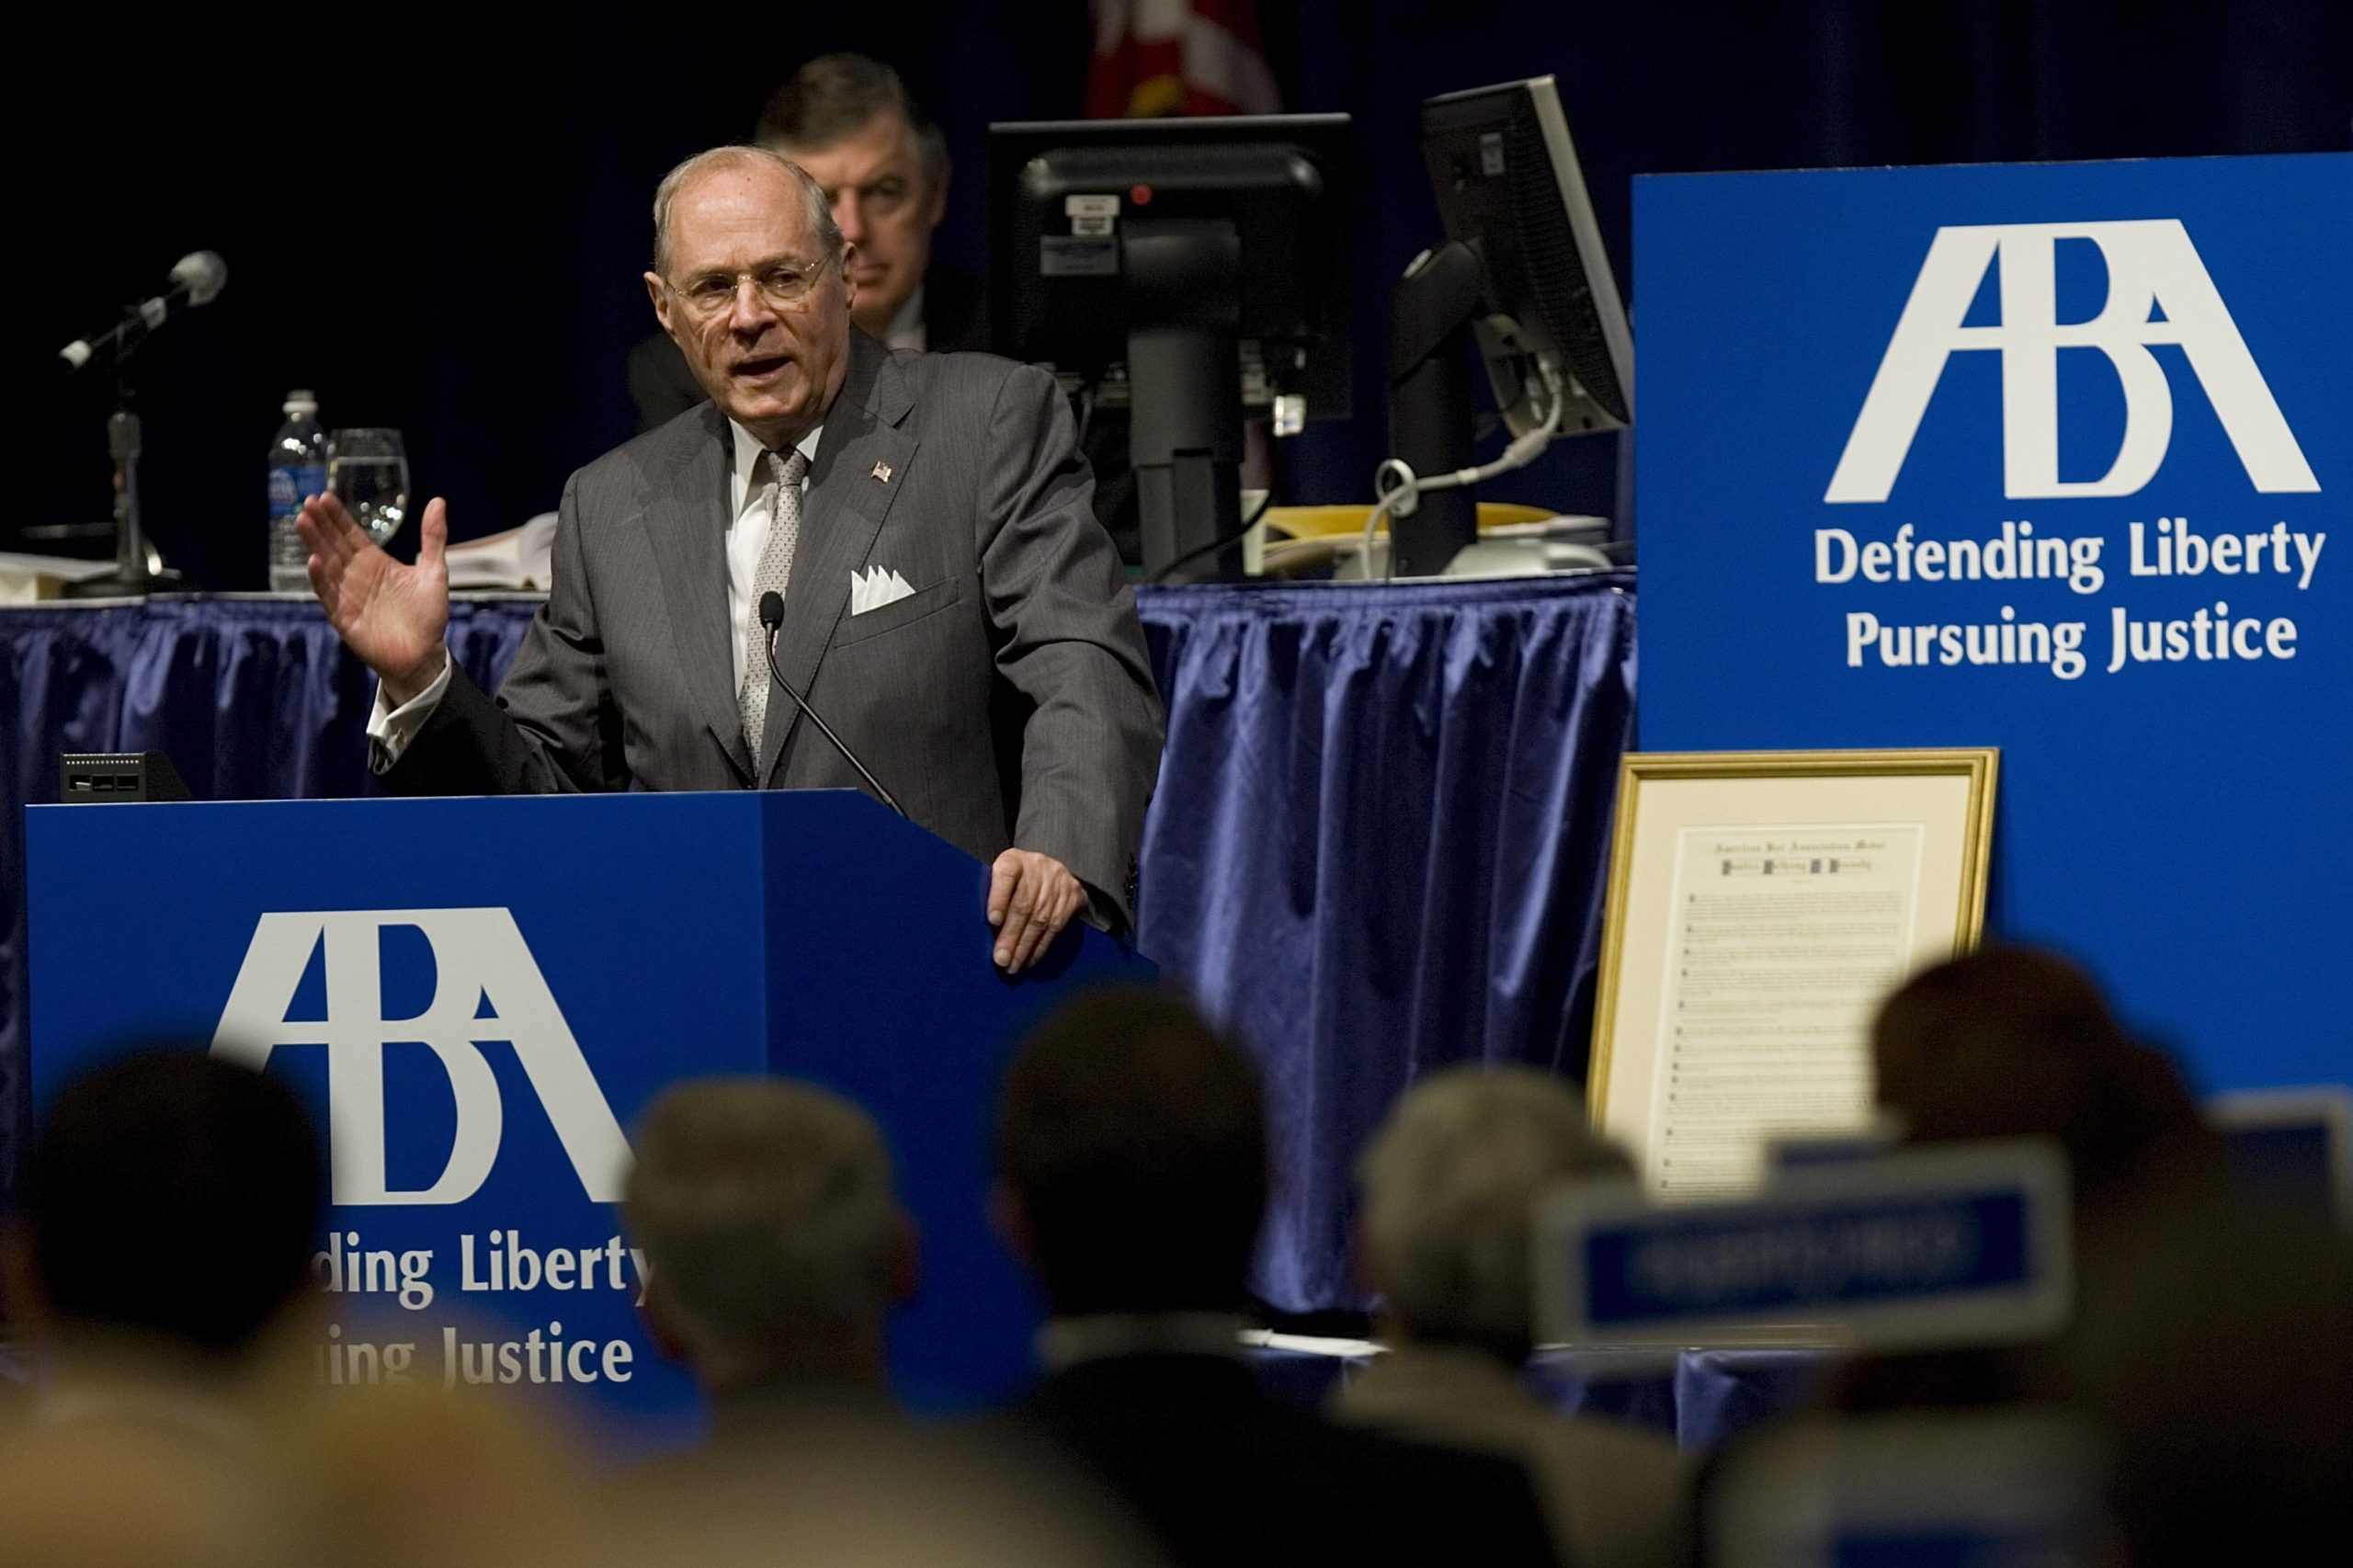 Anthony Kennedy, associate Justice of the United States Supreme Court, speaks to members of the ABA at the Moscone Center August 13, 2007 in San Francisco, California. In 1988 President Ronald Reagan appointed Kennedy, a moderate, to the Supreme Court. He often acts as the swing voter. (Photo by David Paul Morris/Getty Images)